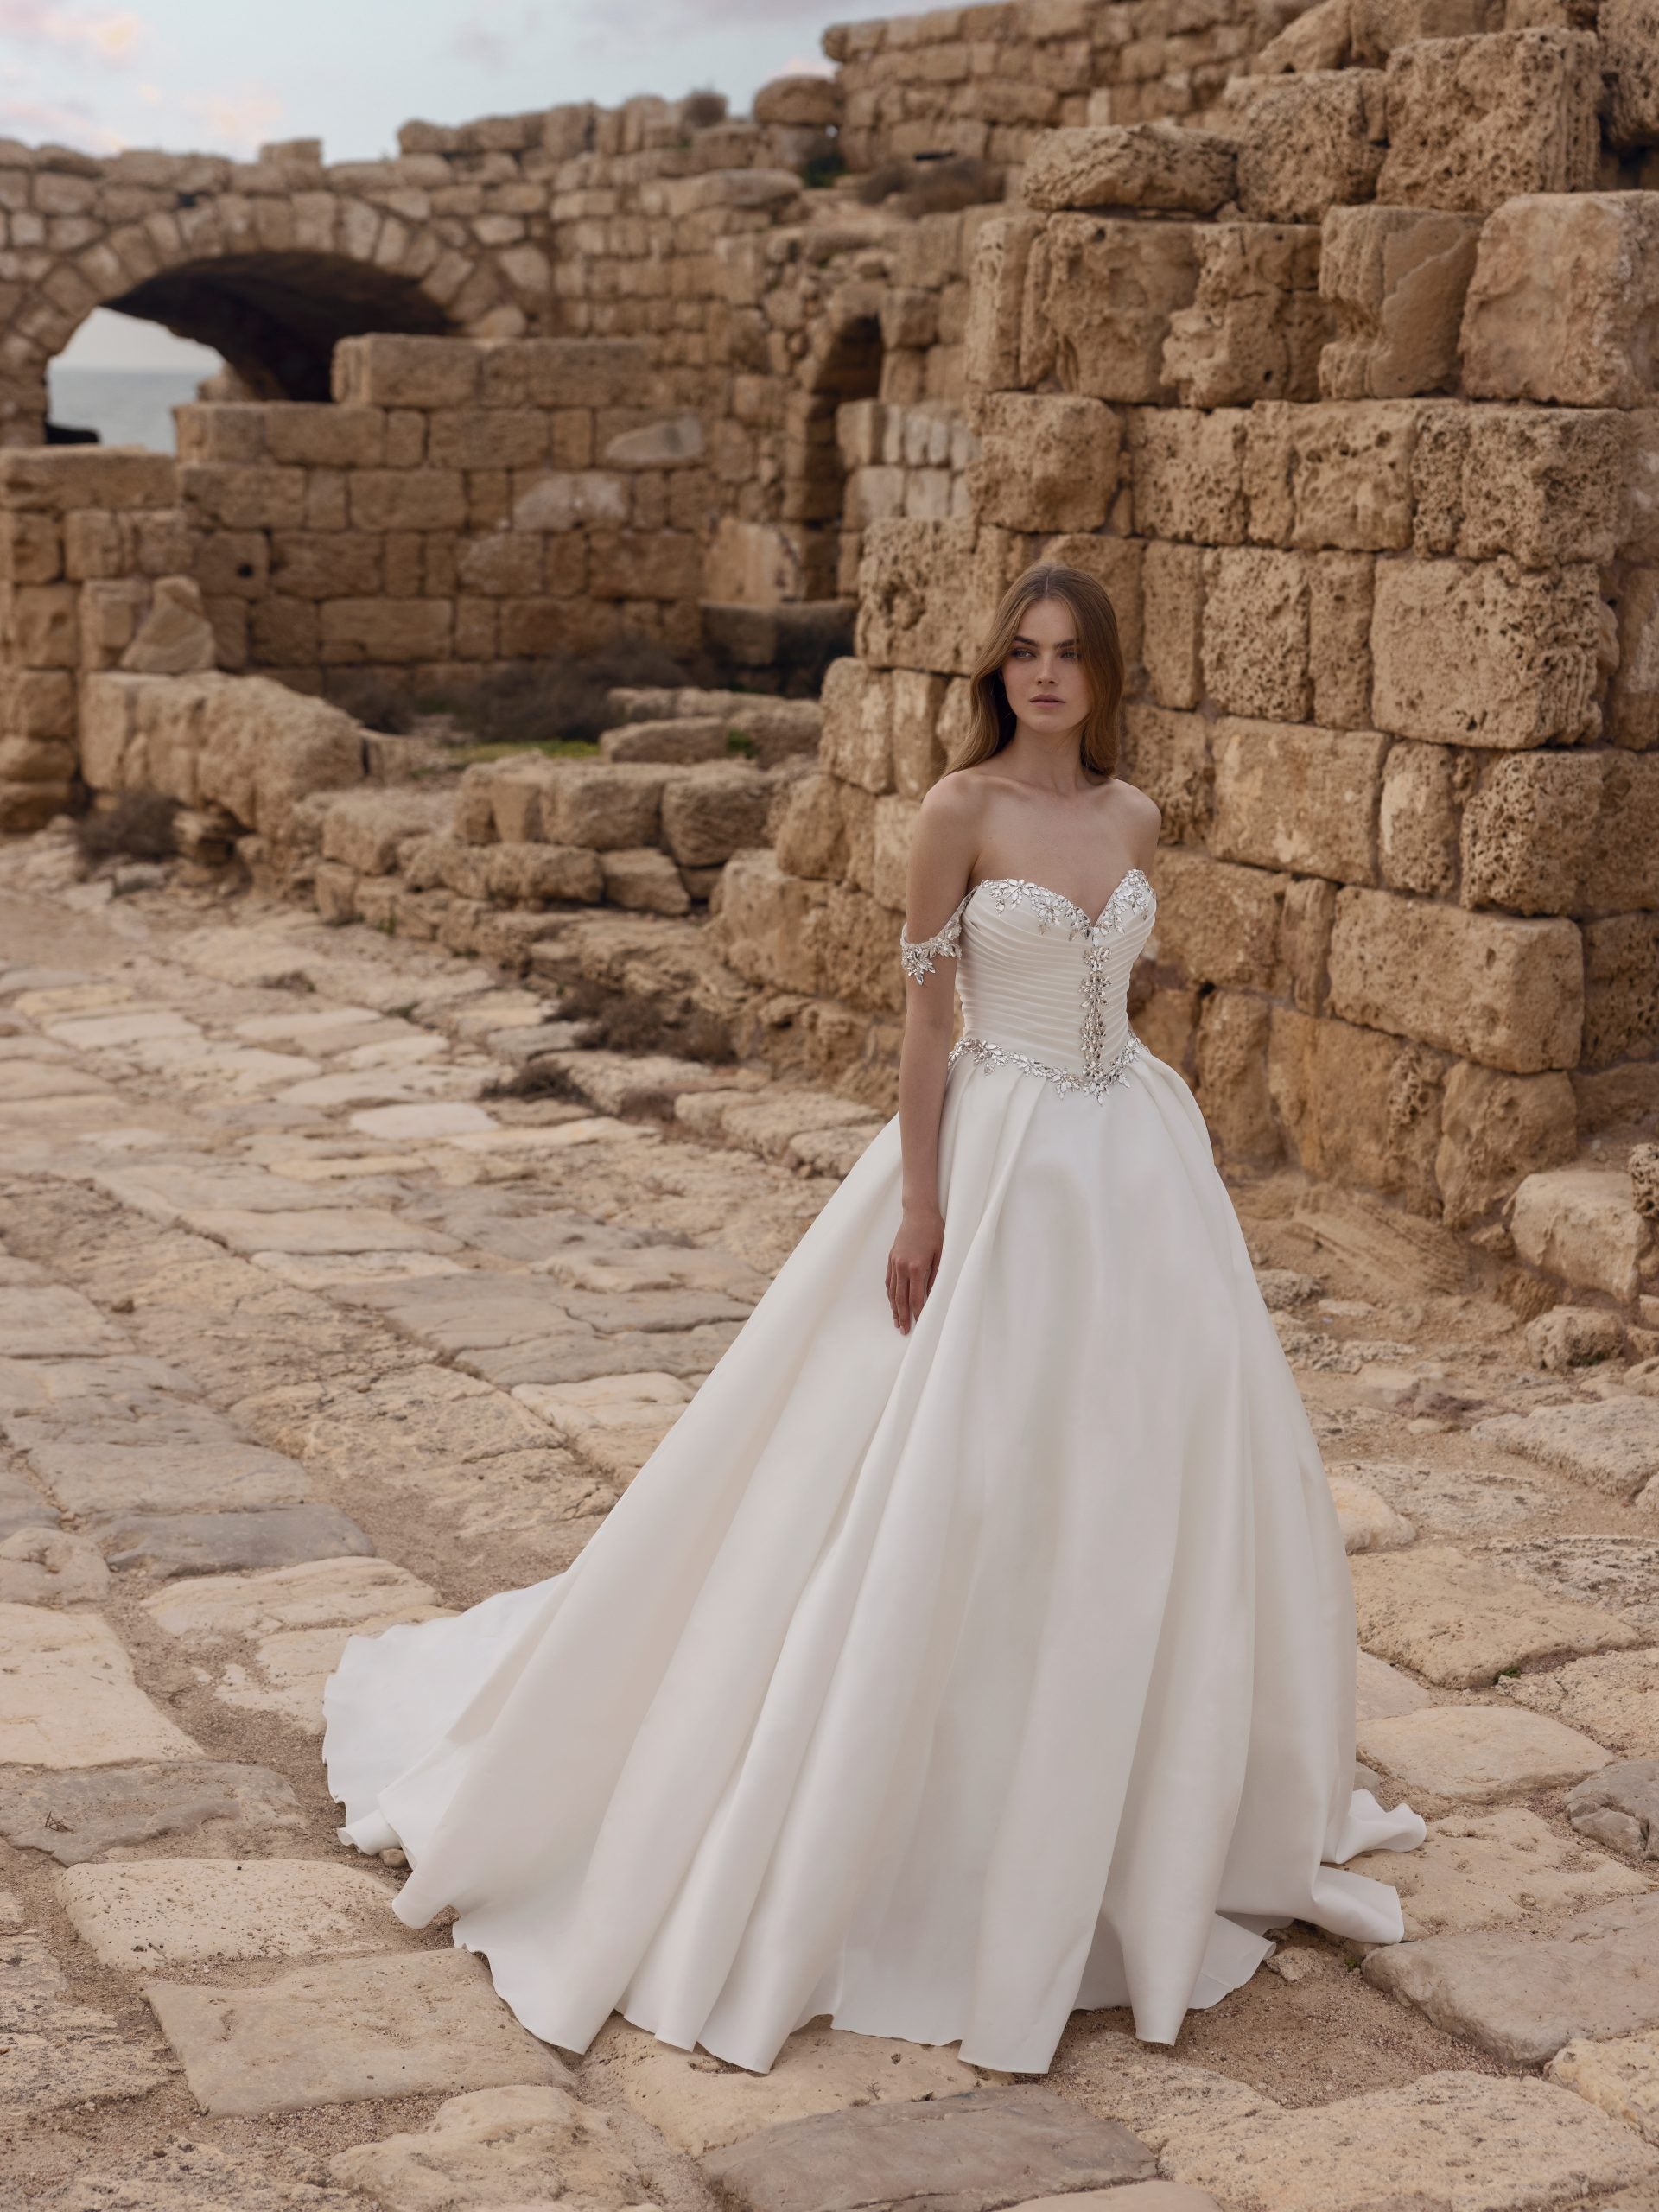 Strapless Ball Gown Wedding Dress With Beaded Bodice by Pnina Tornai - Image 1